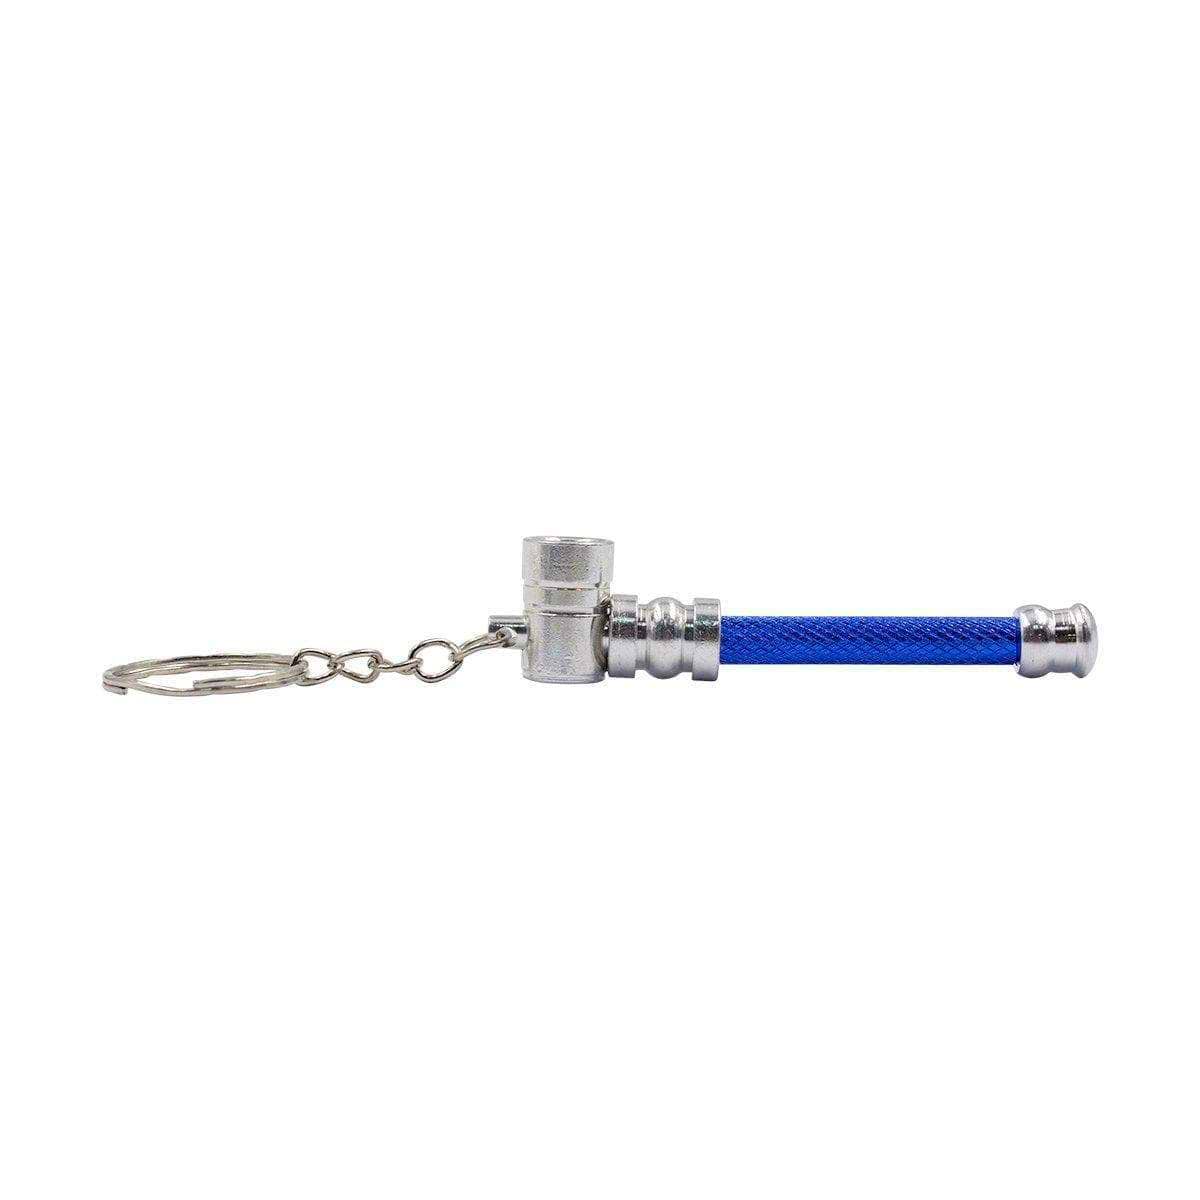 Horizontal Mini keychain pipe in a cylinder hammer-like shape vibrant Blue stainless steel both ends with keyring